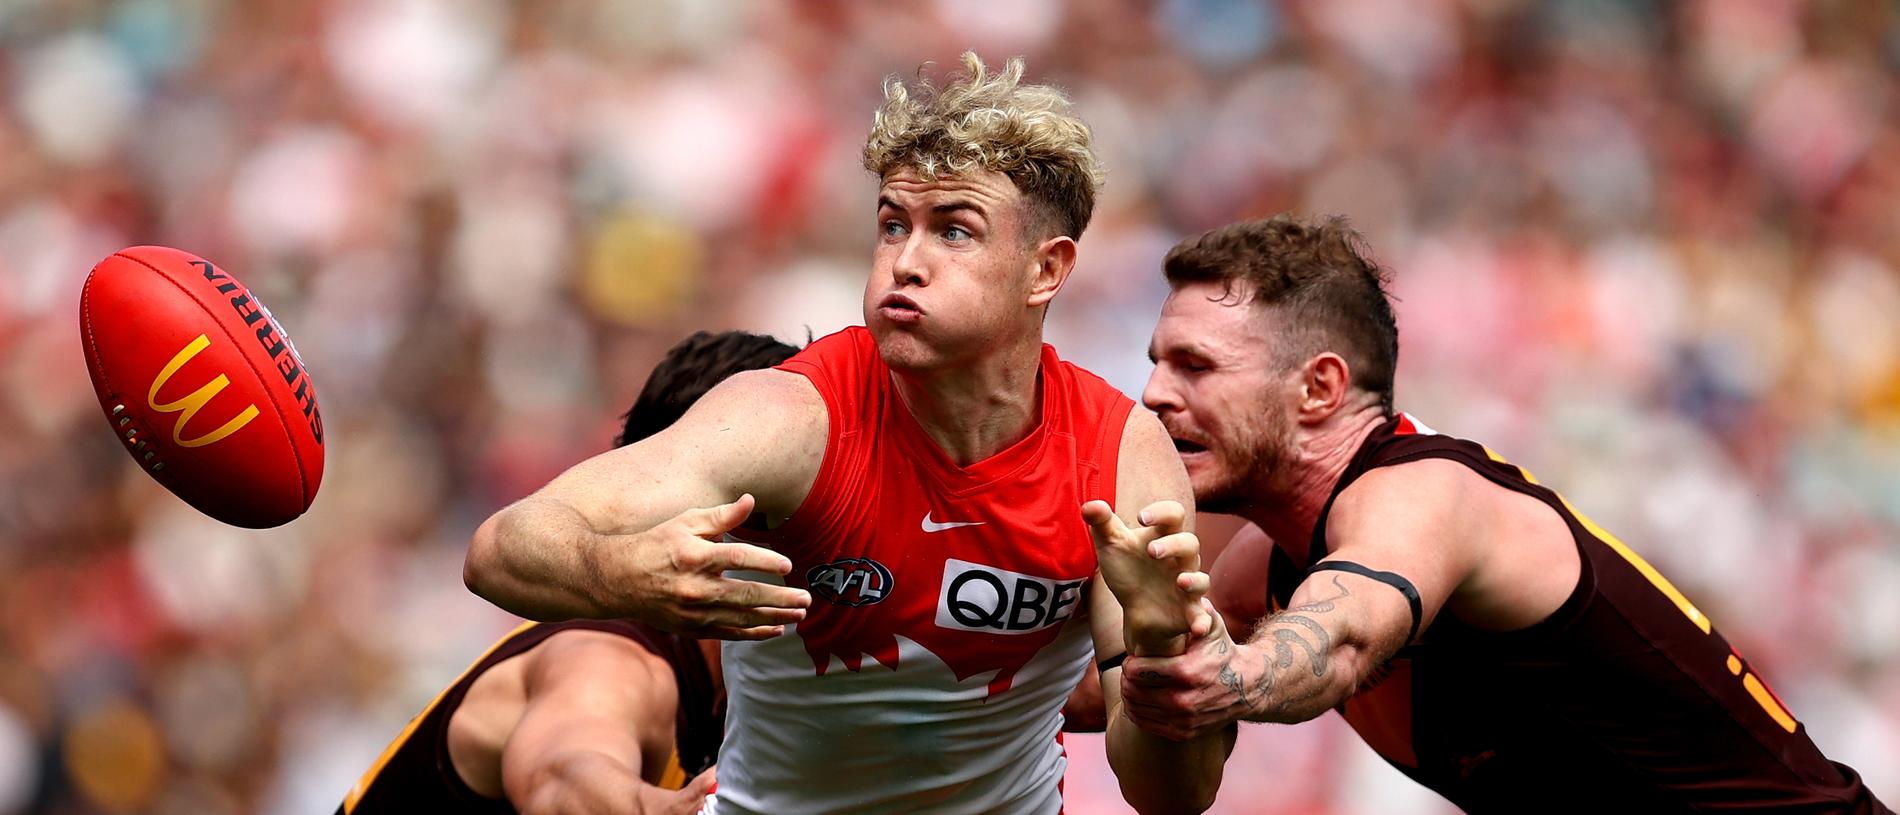 SYDNEY, AUSTRALIA - MARCH 26: Chad Warner of the Swans contests the ball with Connor Macdonald and Blake Hardwick of the Hawks during the round two AFL match between Sydney Swans and Hawthorn Hawks at Sydney Cricket Ground, on March 26, 2023, in Sydney, Australia. (Photo by Brendon Thorne/AFL Photos/via Getty Images)